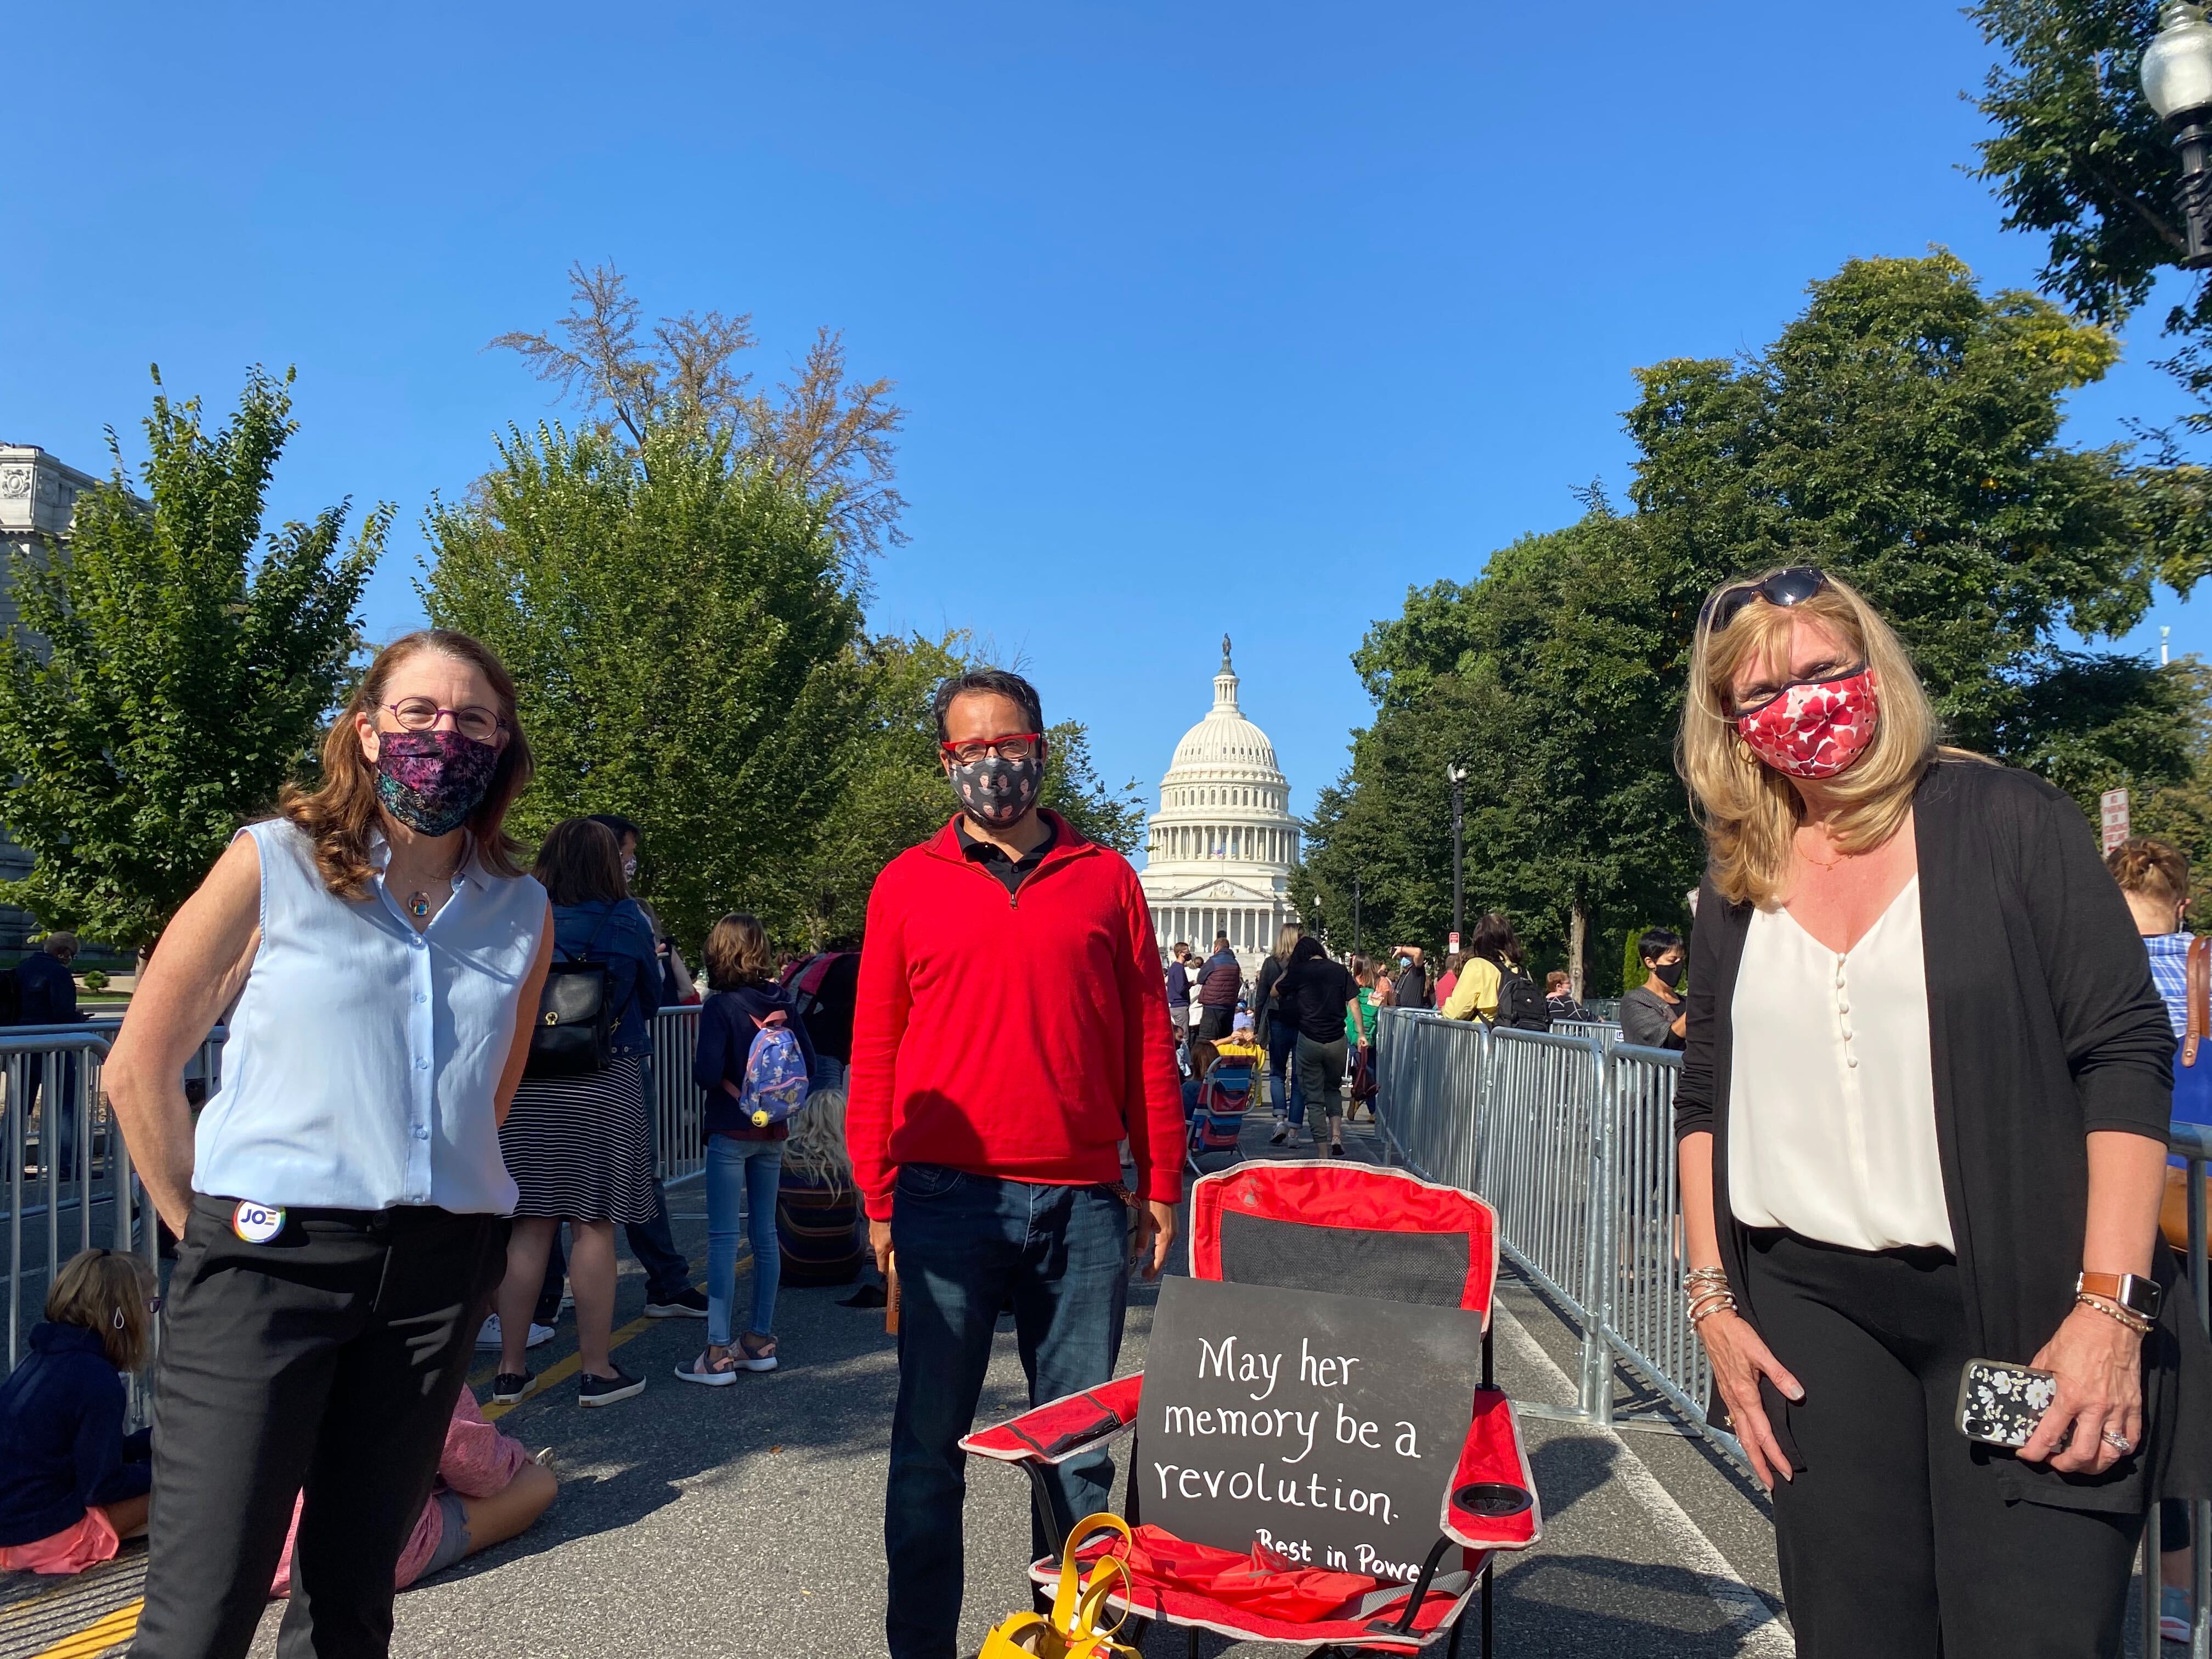 From left, Jill Alexander of Rockville, Maryland, Yoni Boch of Washington, DC, and Cecelia Ryan of Naperville, Illinois, struck up an unexpected friendship outside the Supreme Court on Wednesday